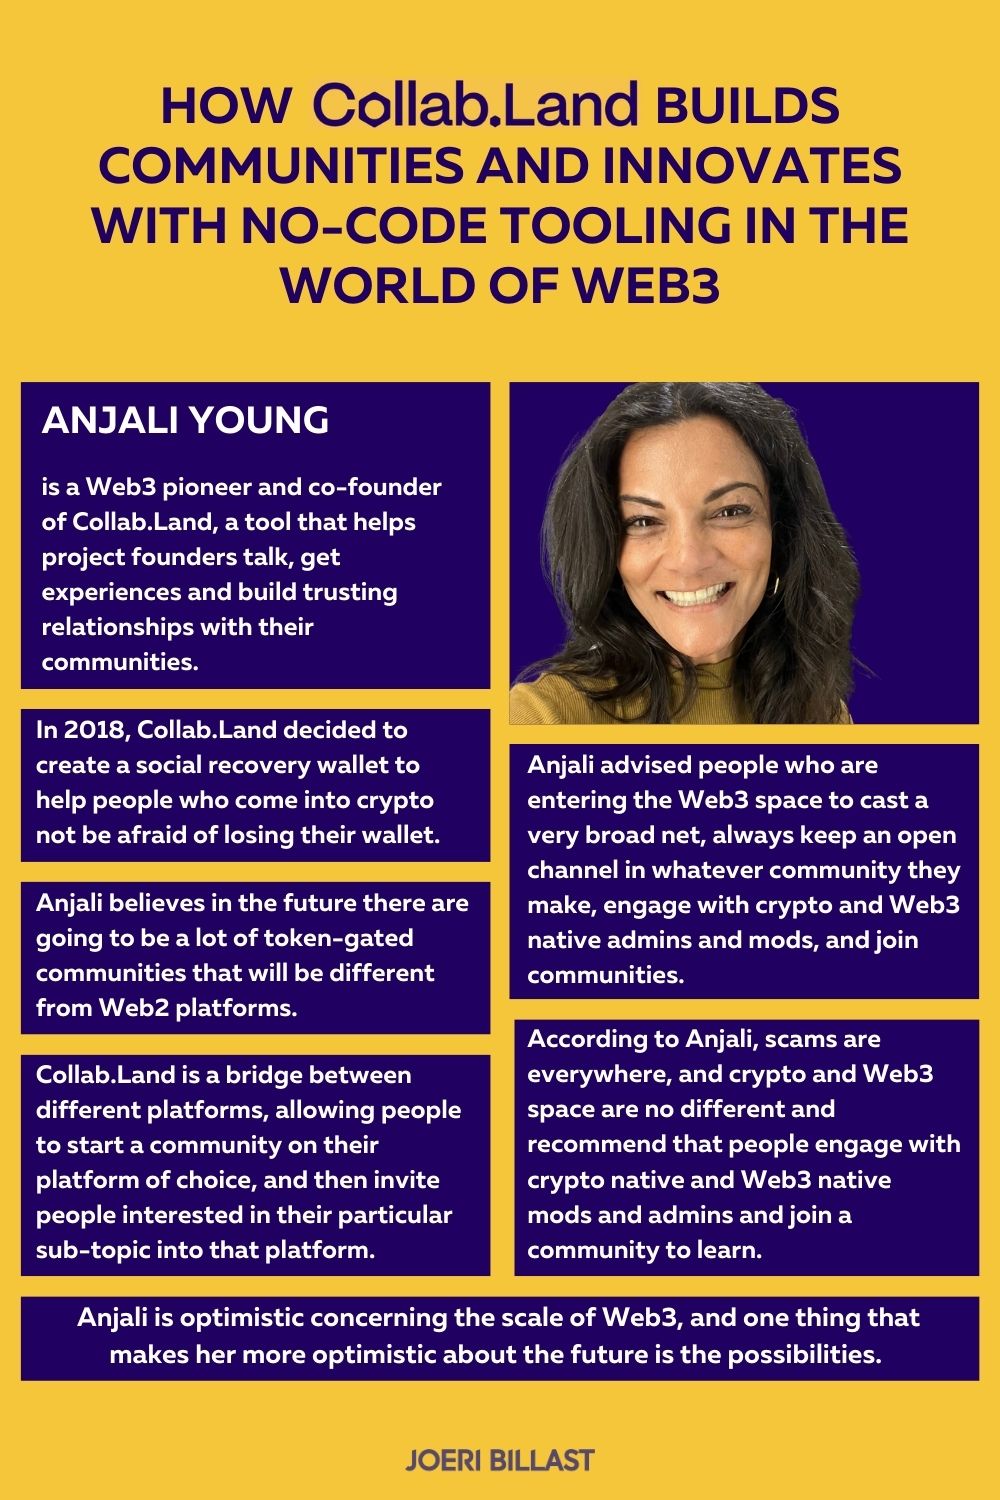 How Collab.Land Builds Communities and Innovates with No-Code Tooling in the World of Web3 – with Anjali Young